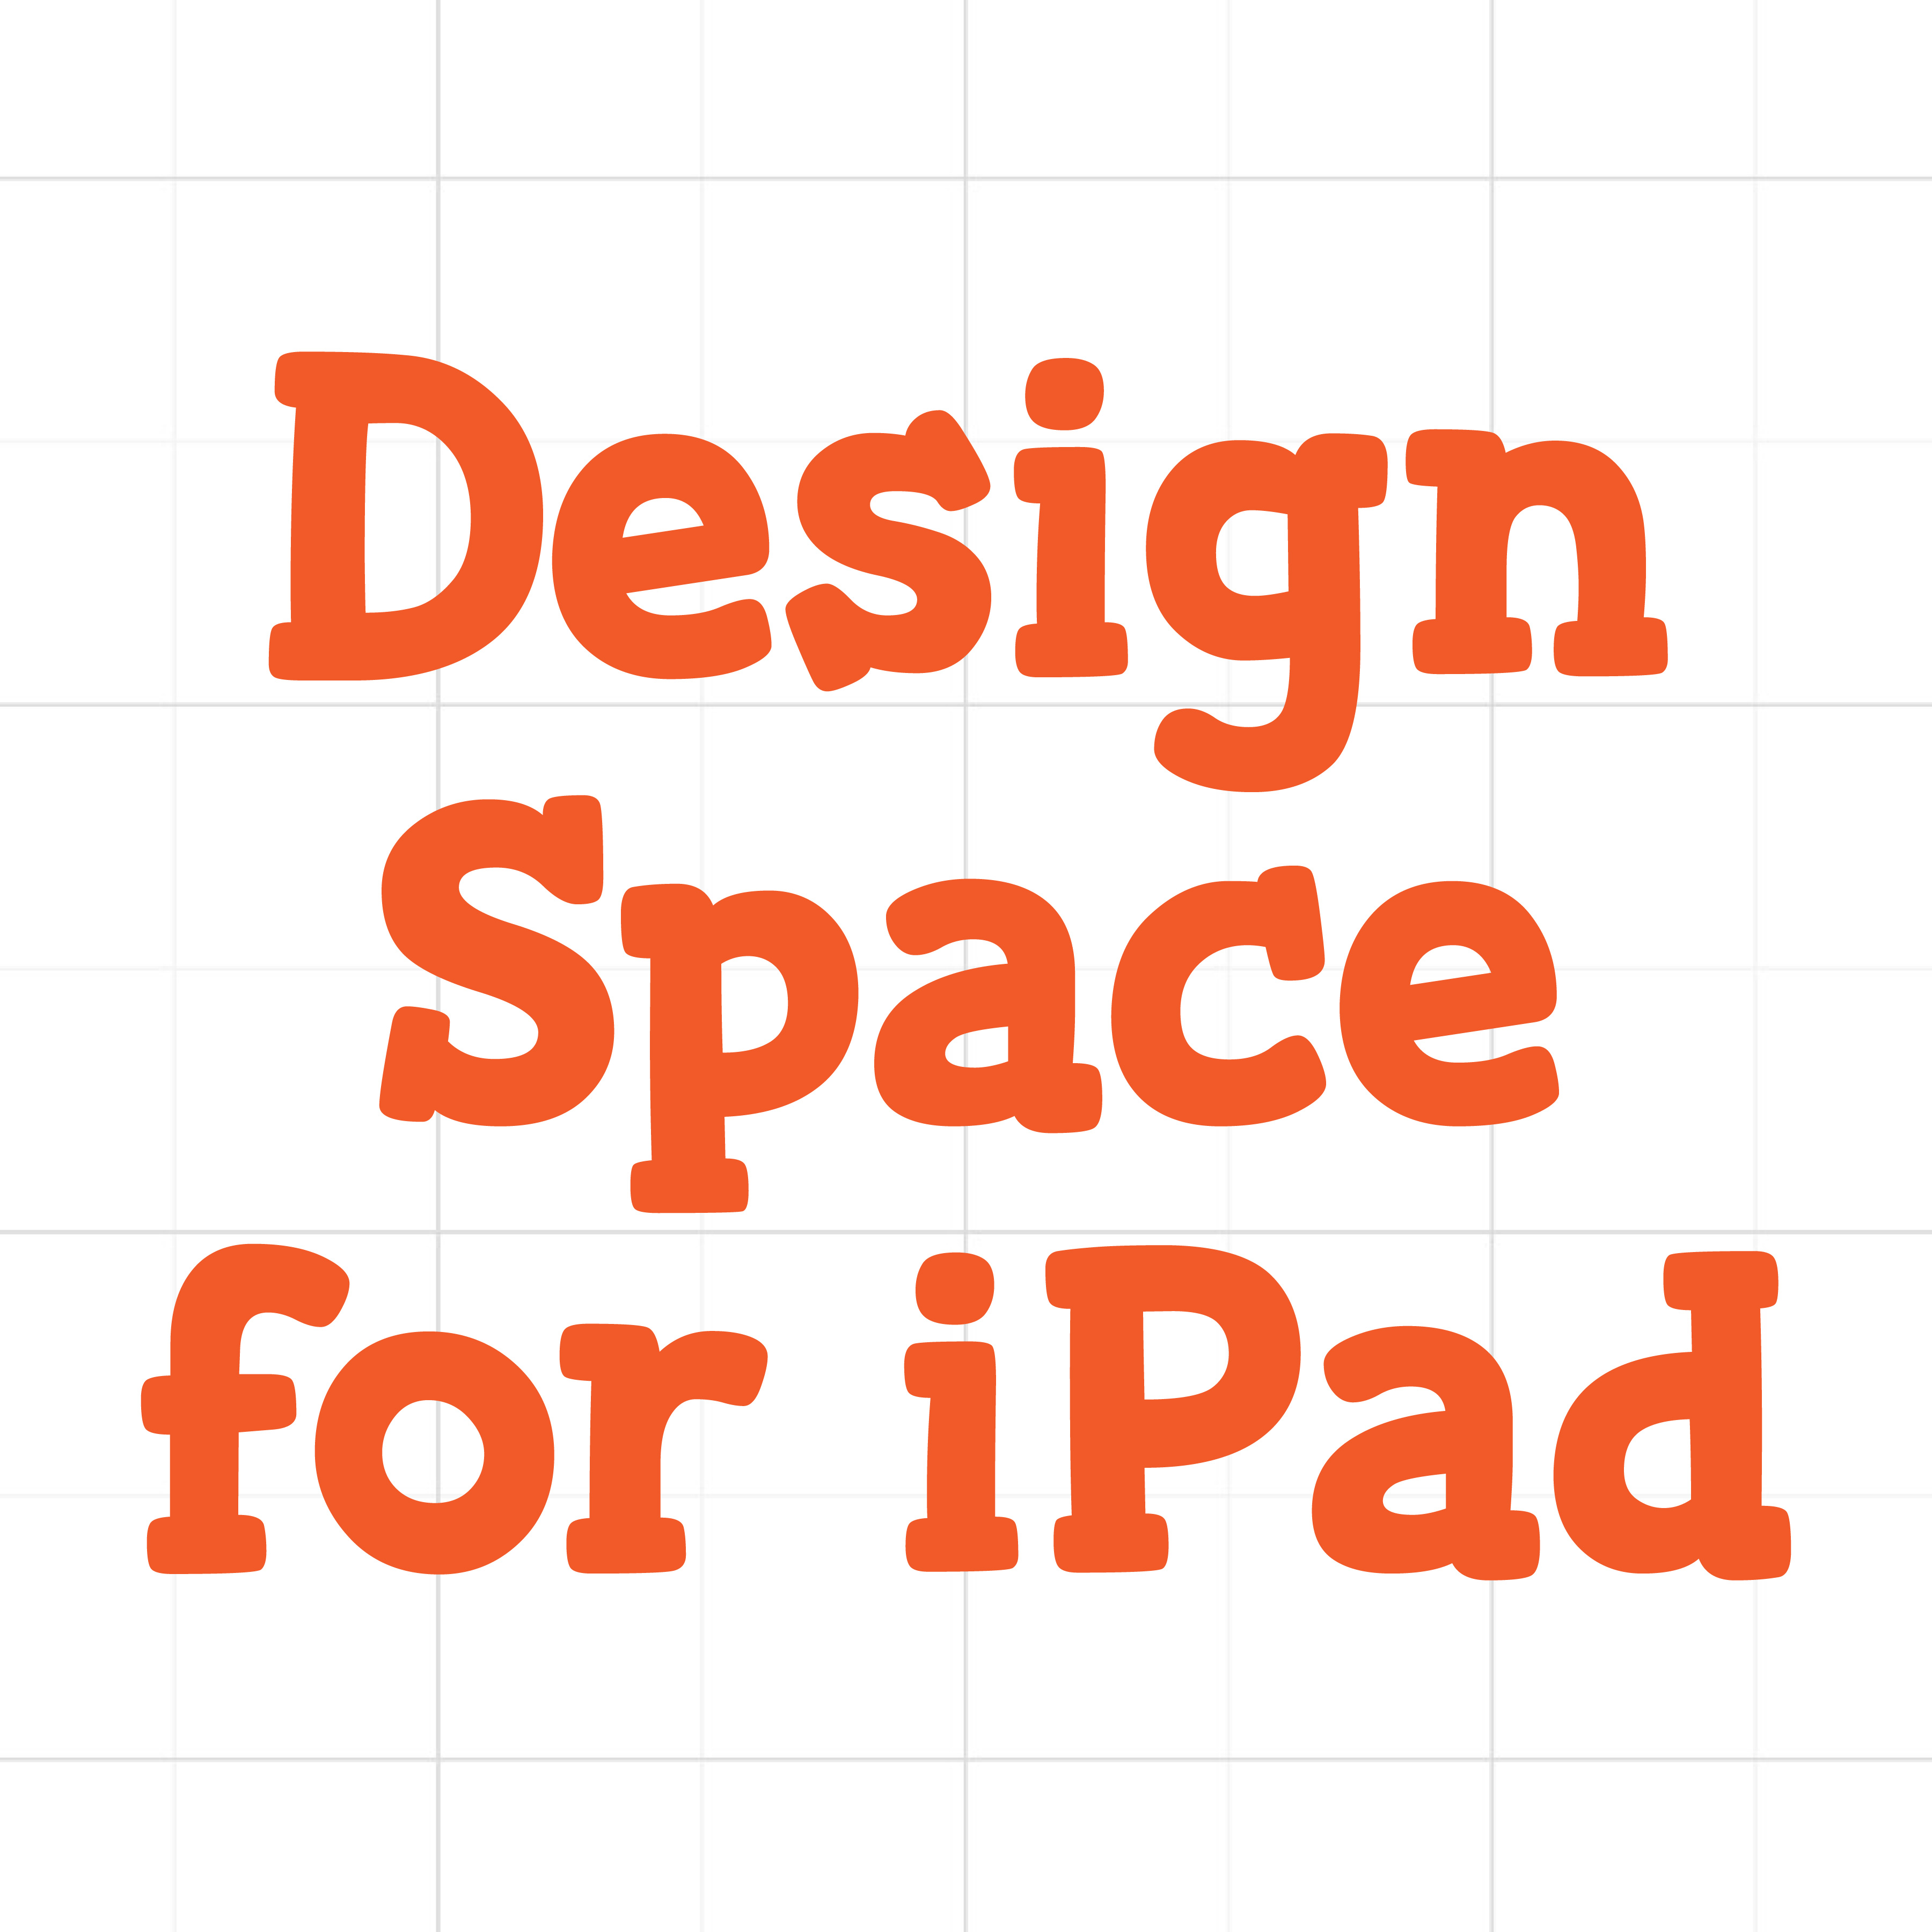 Download Design Space for iPad - SVG EPS PNG DXF Cut Files for Cricut and Silhouette Cameo by SavanasDesign